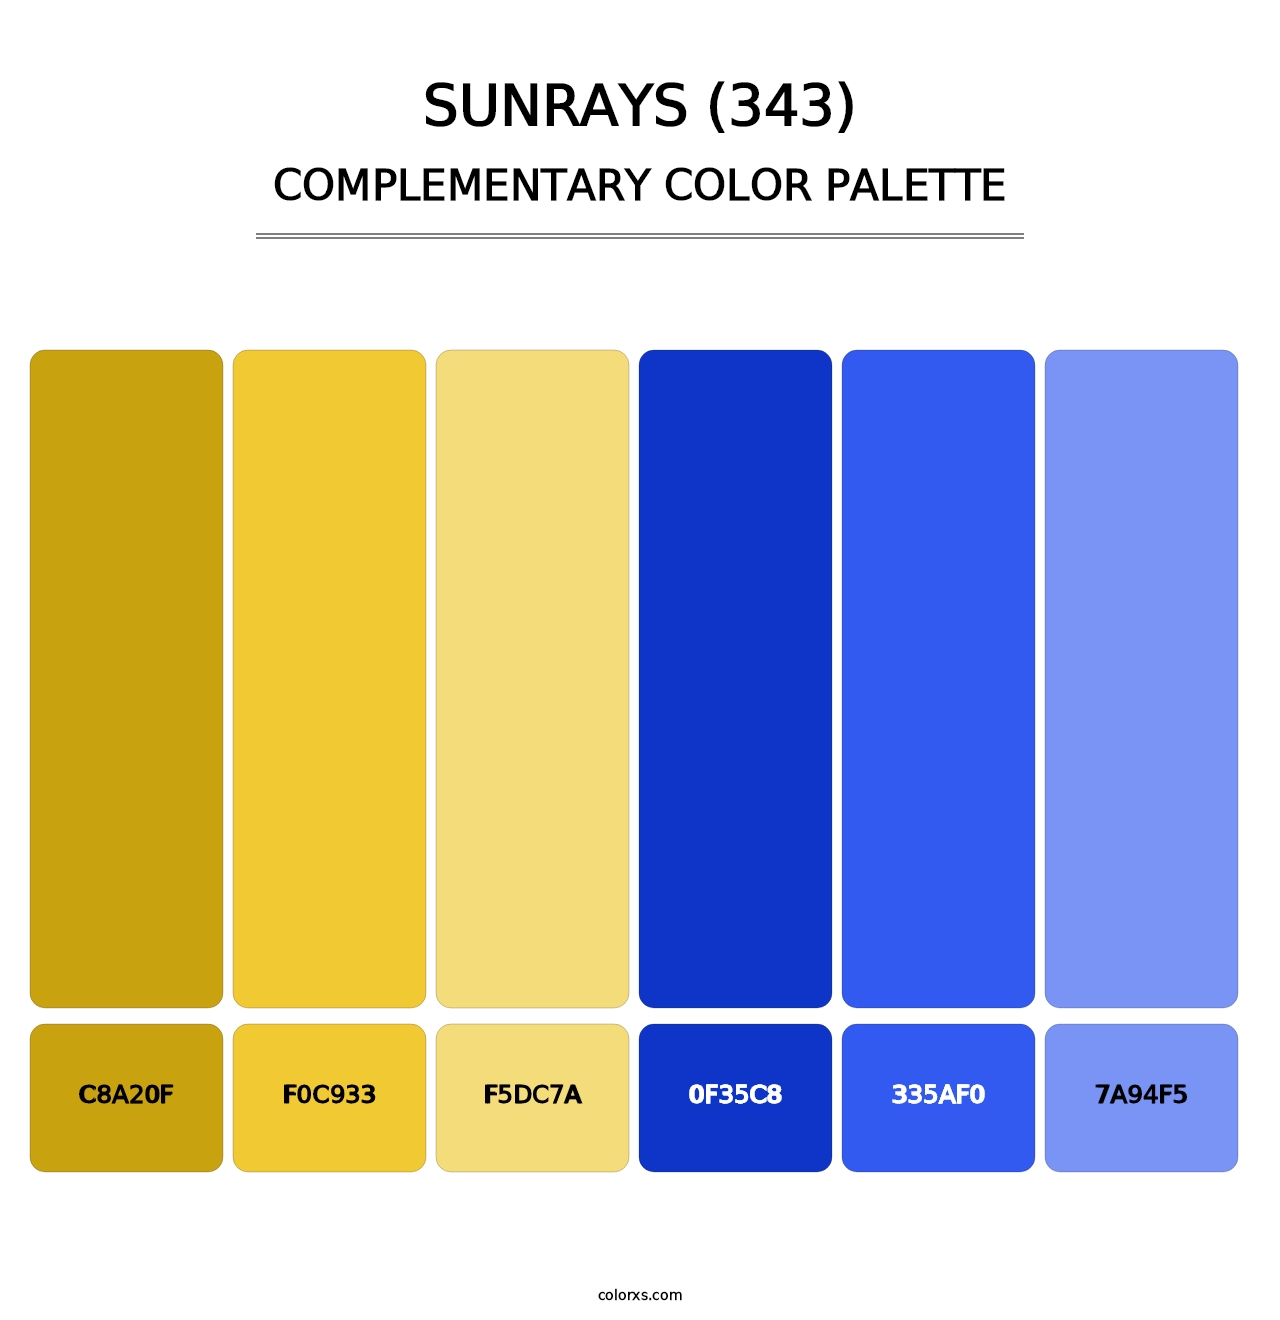 Sunrays (343) - Complementary Color Palette